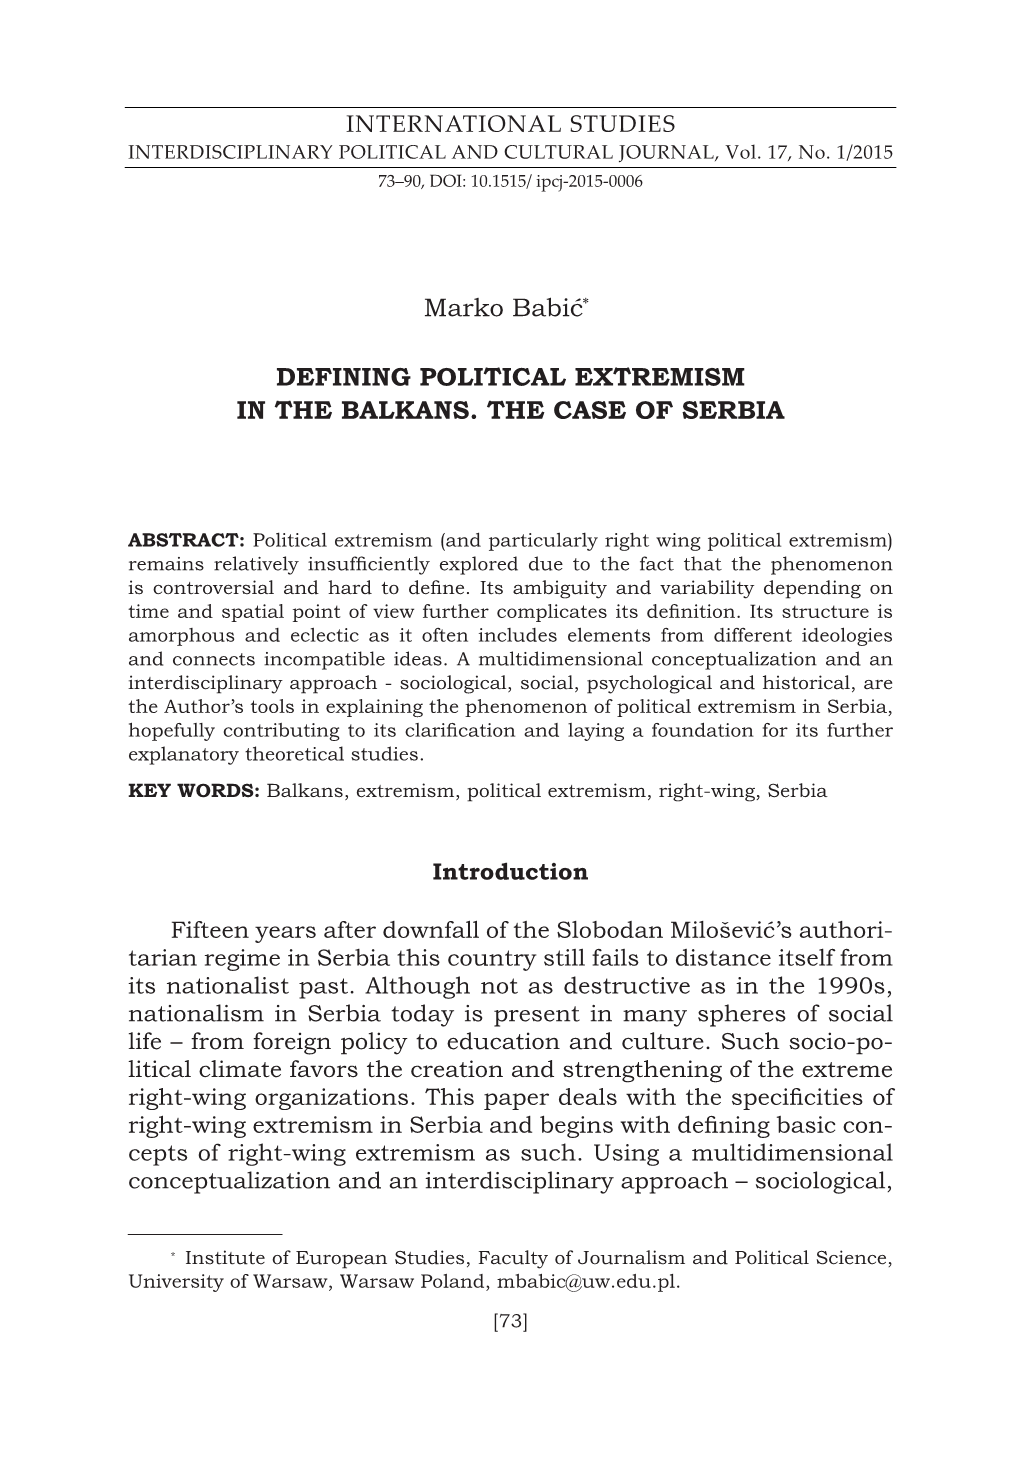 Marko Babić* Defining Political Extremism in the Balkans. The